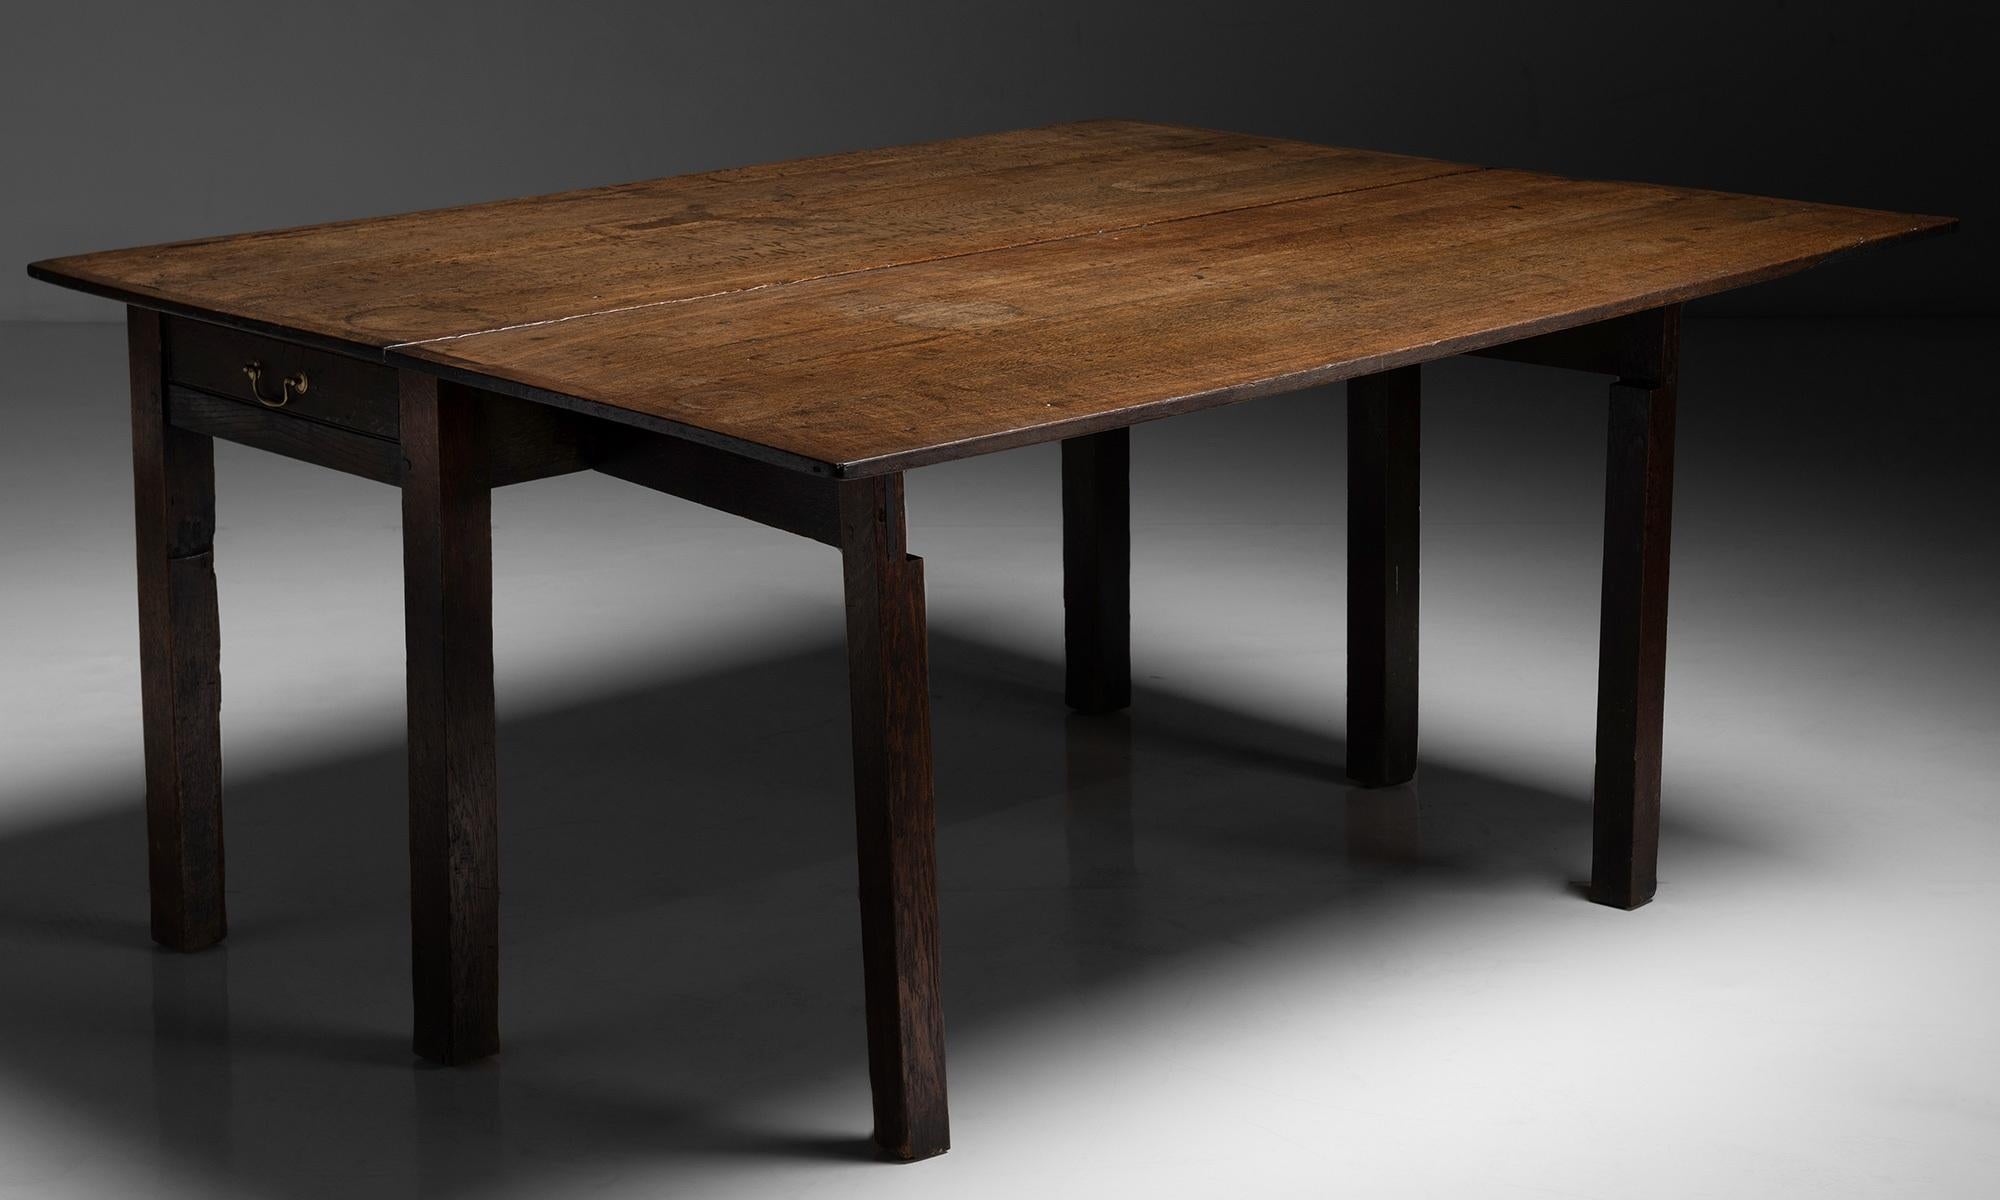 Cumbrian oak dining table.

England, circa 1789.

Unique dining table with a leaf to one side. Designed to be sat at along one side with the drop leaf against the wall, and then pulled out to seat additional guests.

Measures: 64.25” L x